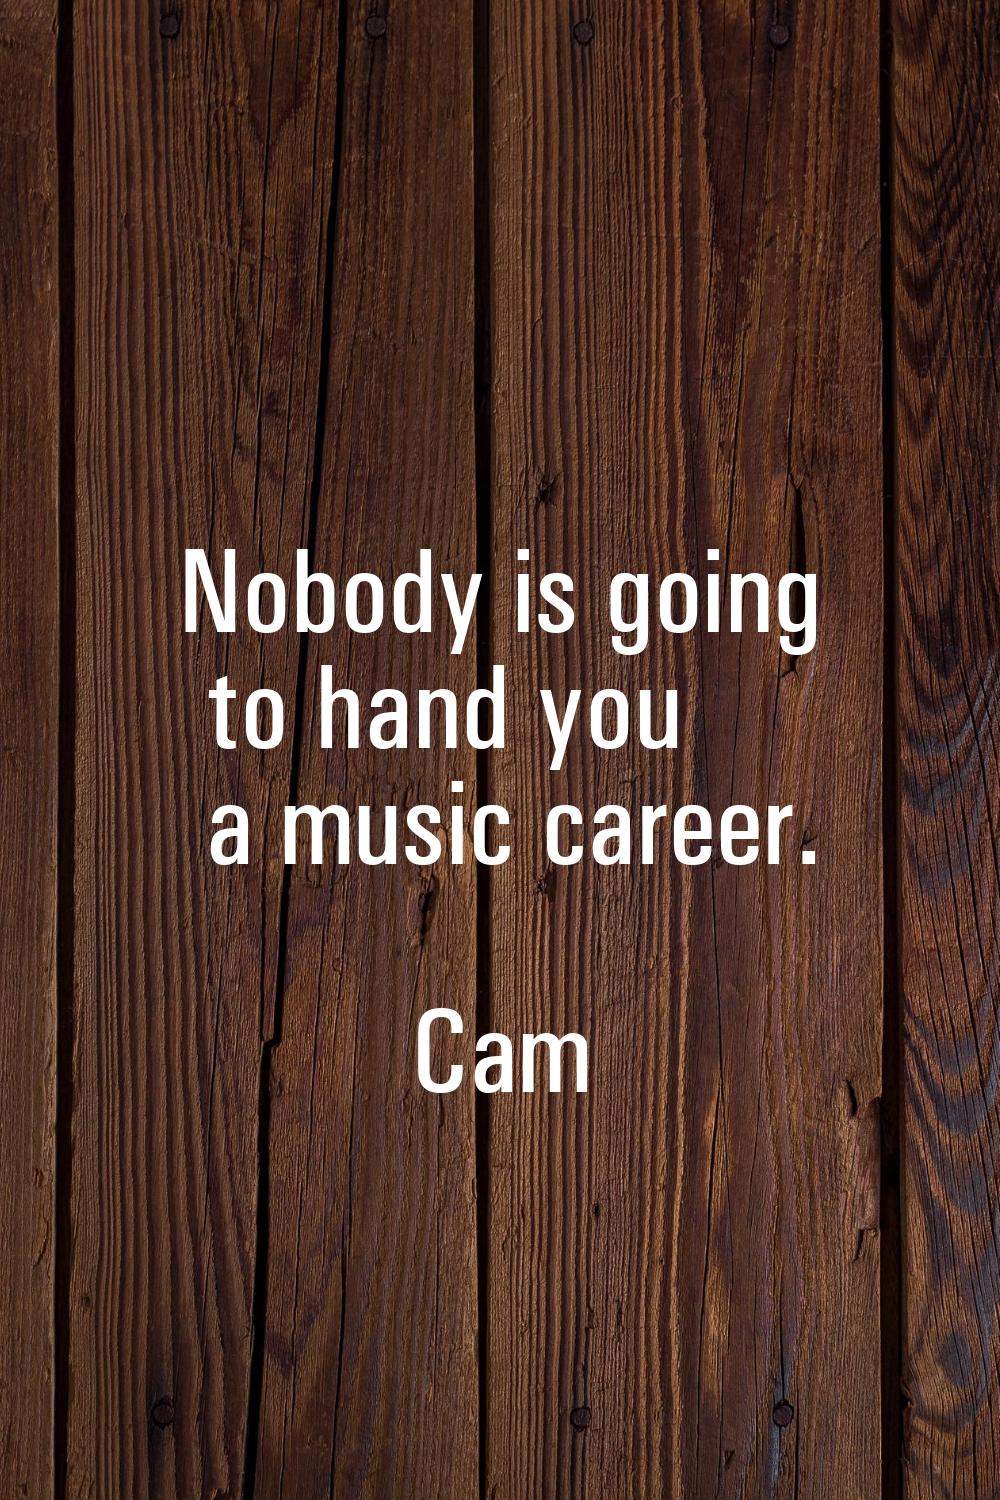 Nobody is going to hand you a music career.